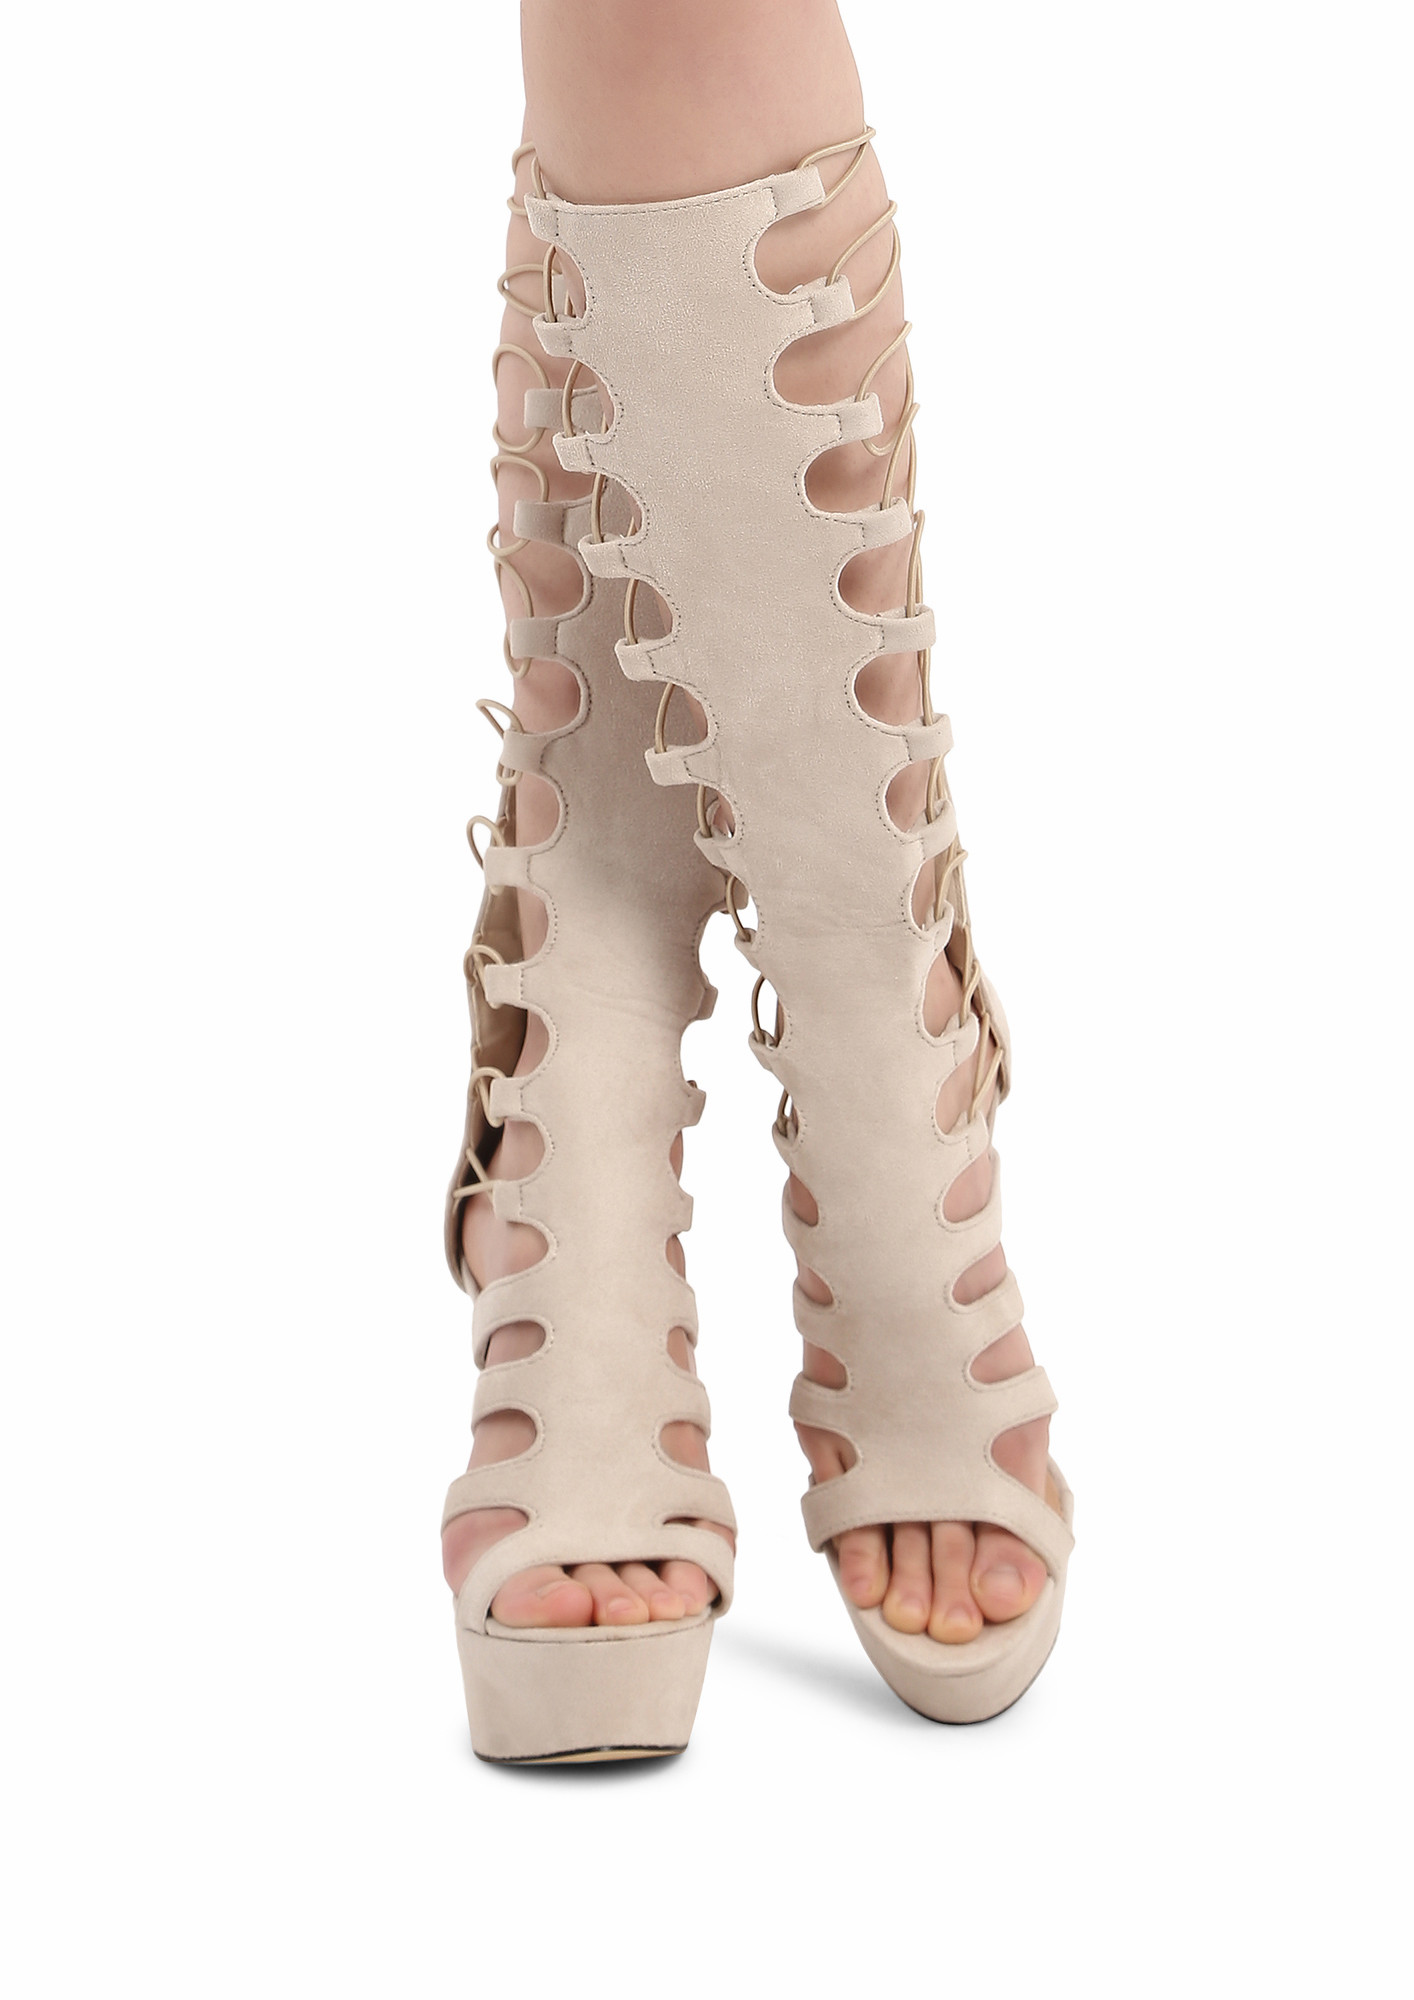 How to Wear the Gladiator Sandal Trend in 2023